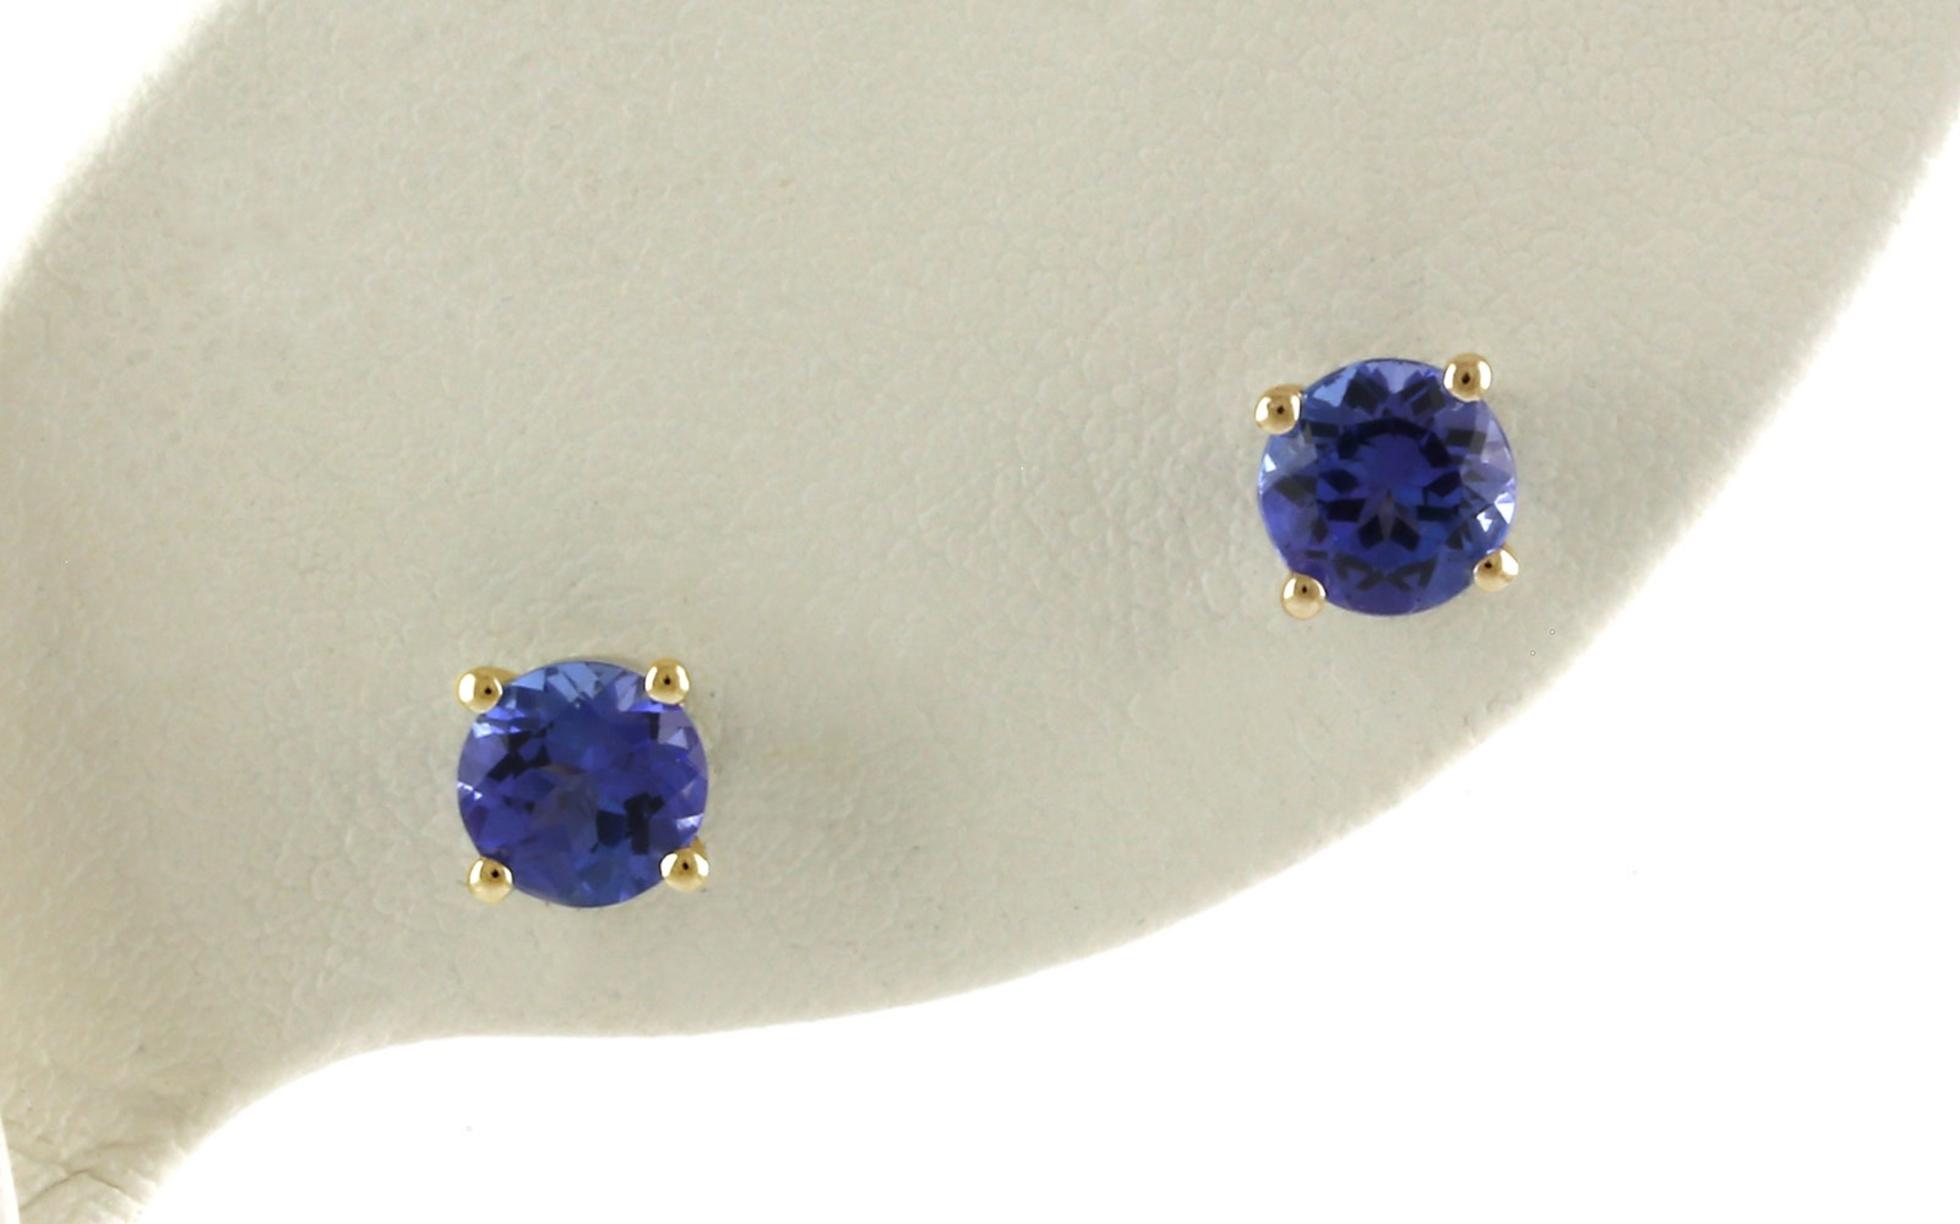 Solitaire Tanzanite Stud Earrings in 4-Prong Settings in Yellow Gold (1.01cts TWT)